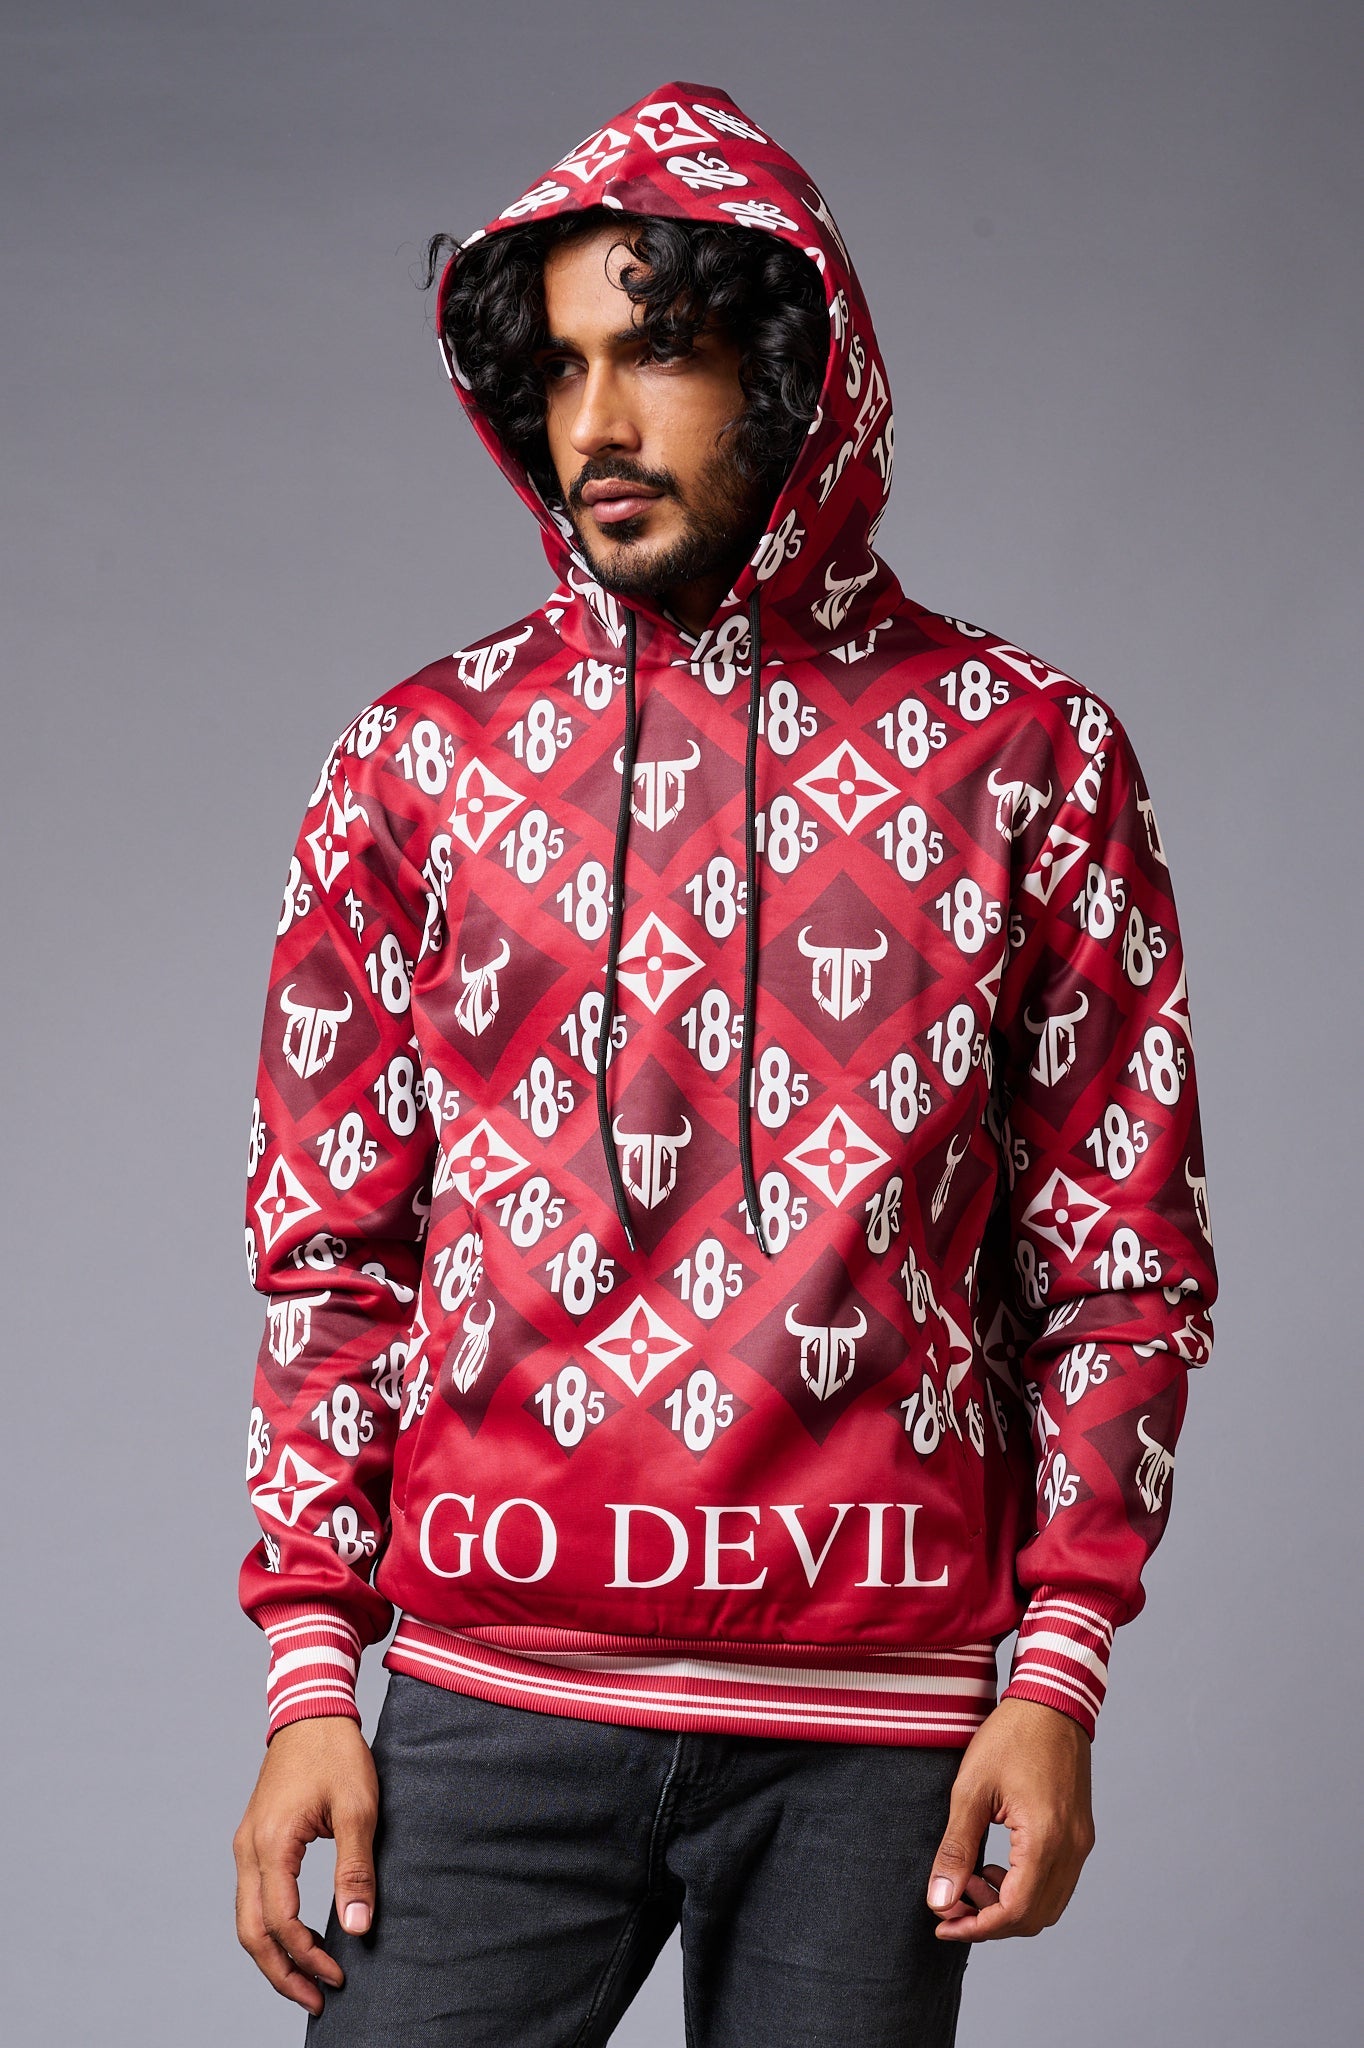 185 GD Logo Printed (with white) Red Hoodie for Men - Go Devil